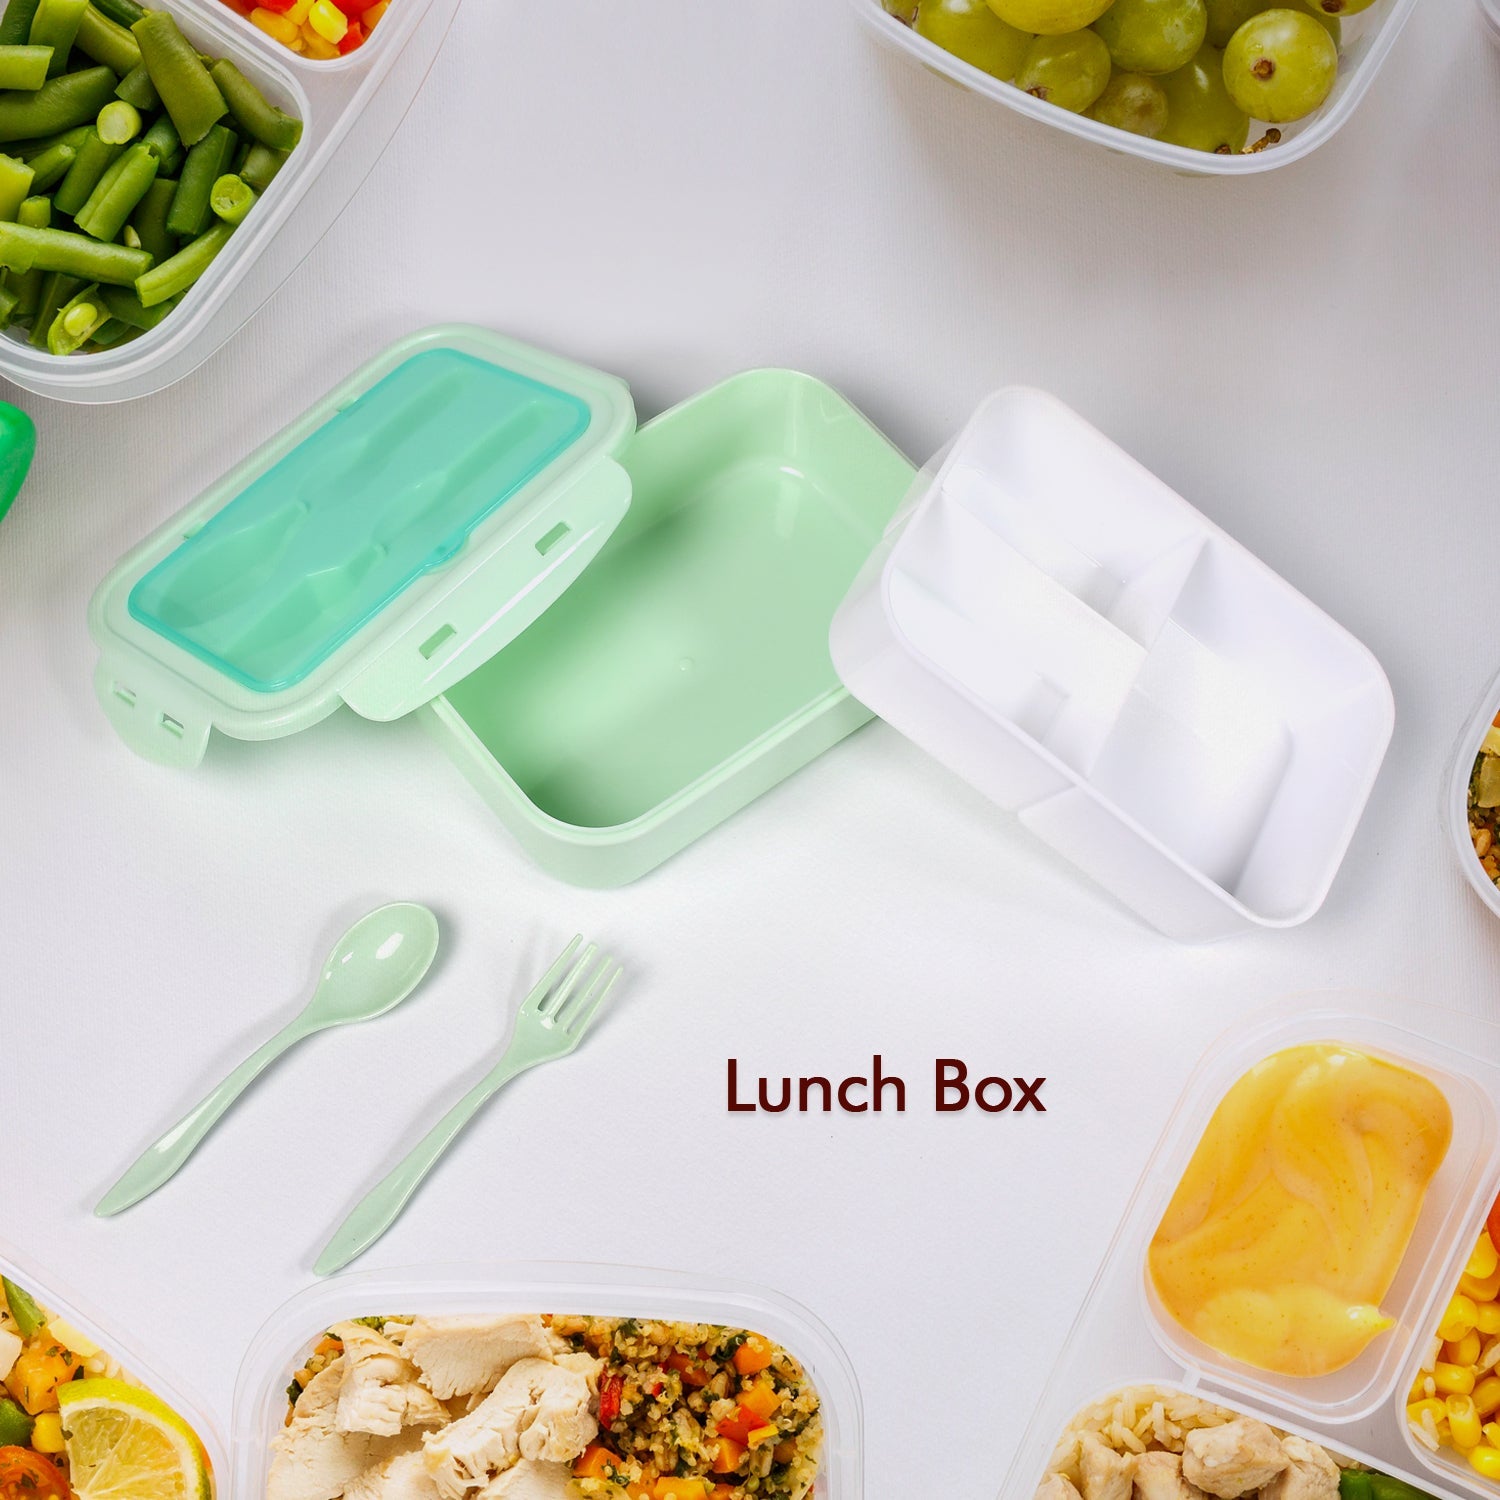 5312 Lunch Box for adults and students With Utensils, Insulated Lunch Bag Suitable for dining out 3-grid leak proof lunch box DeoDap